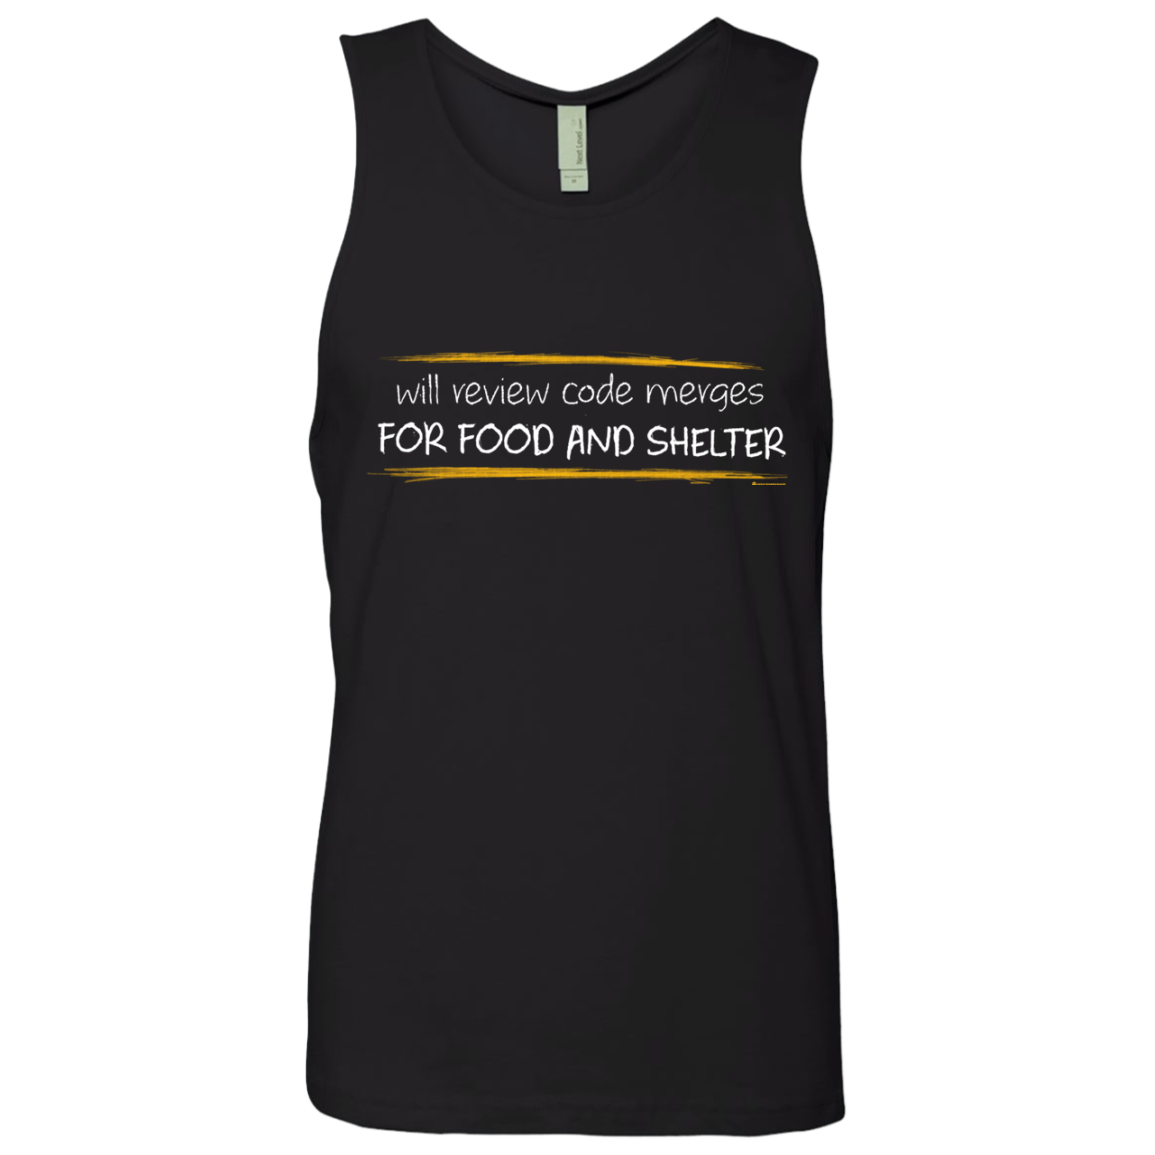 Reviewing Code For Food And Shelter Men's Premium Tank Top